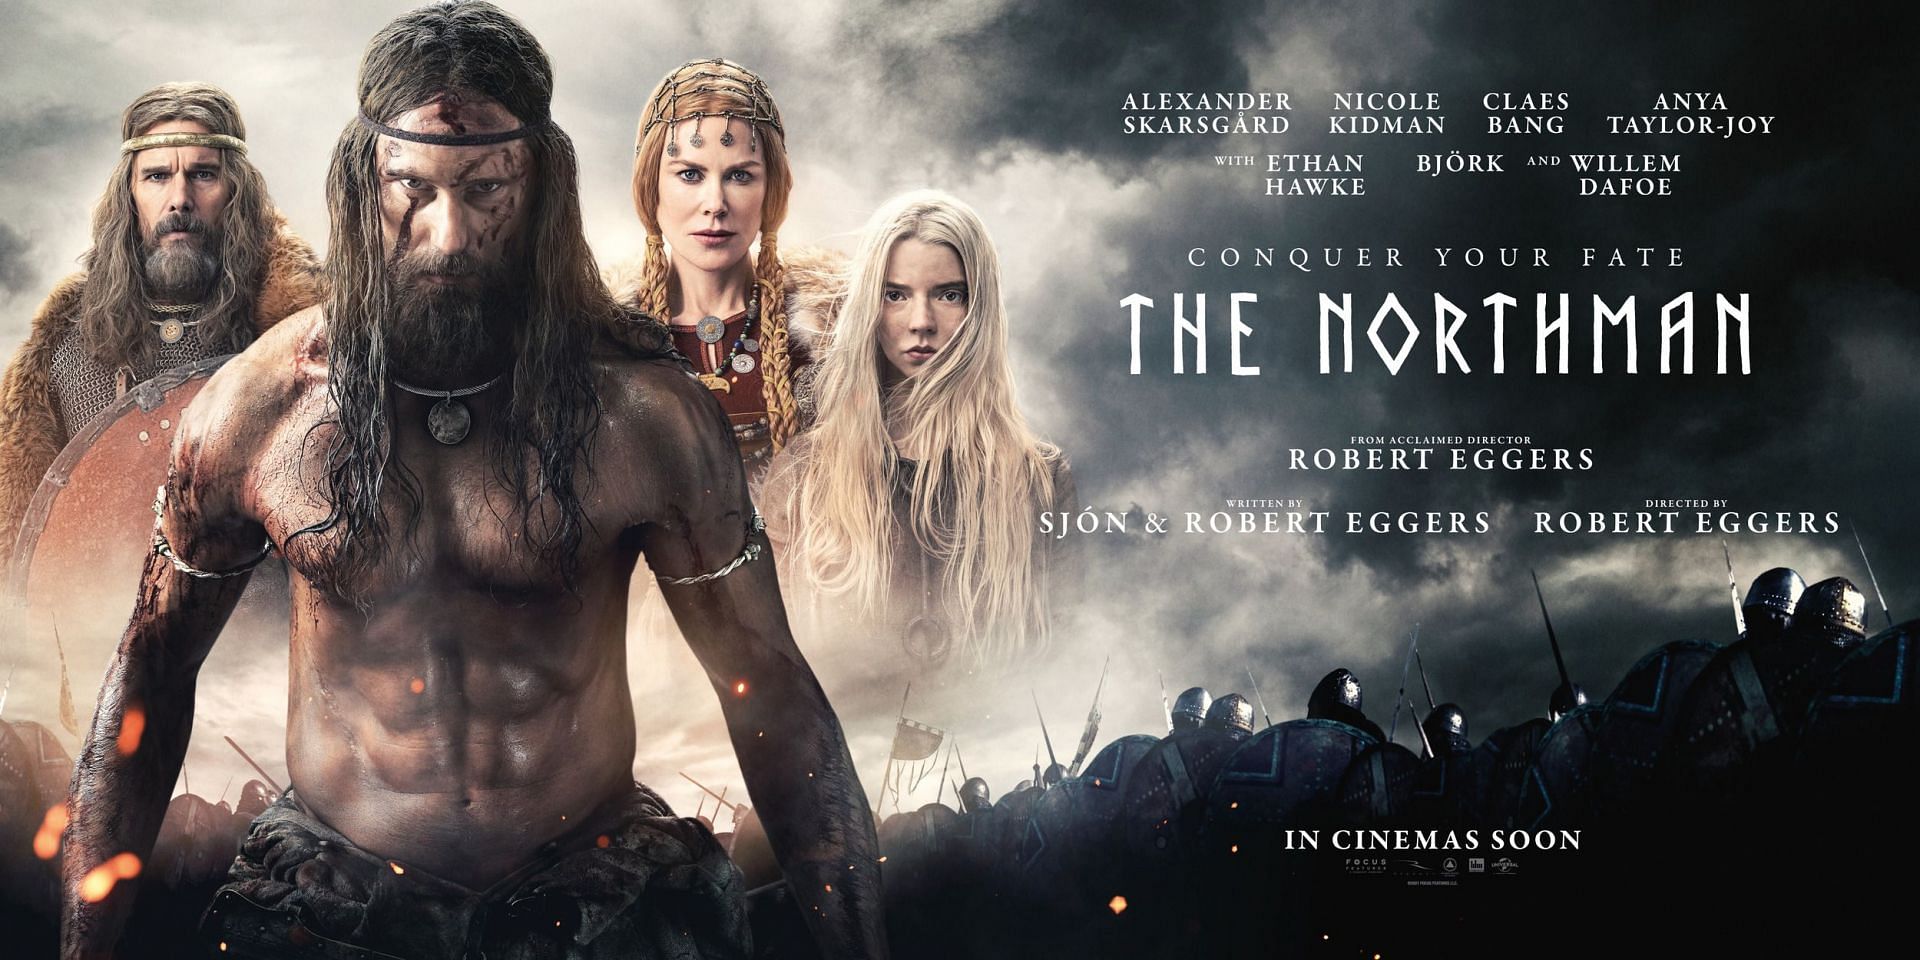 The Northman (Image via Focus Pictures)